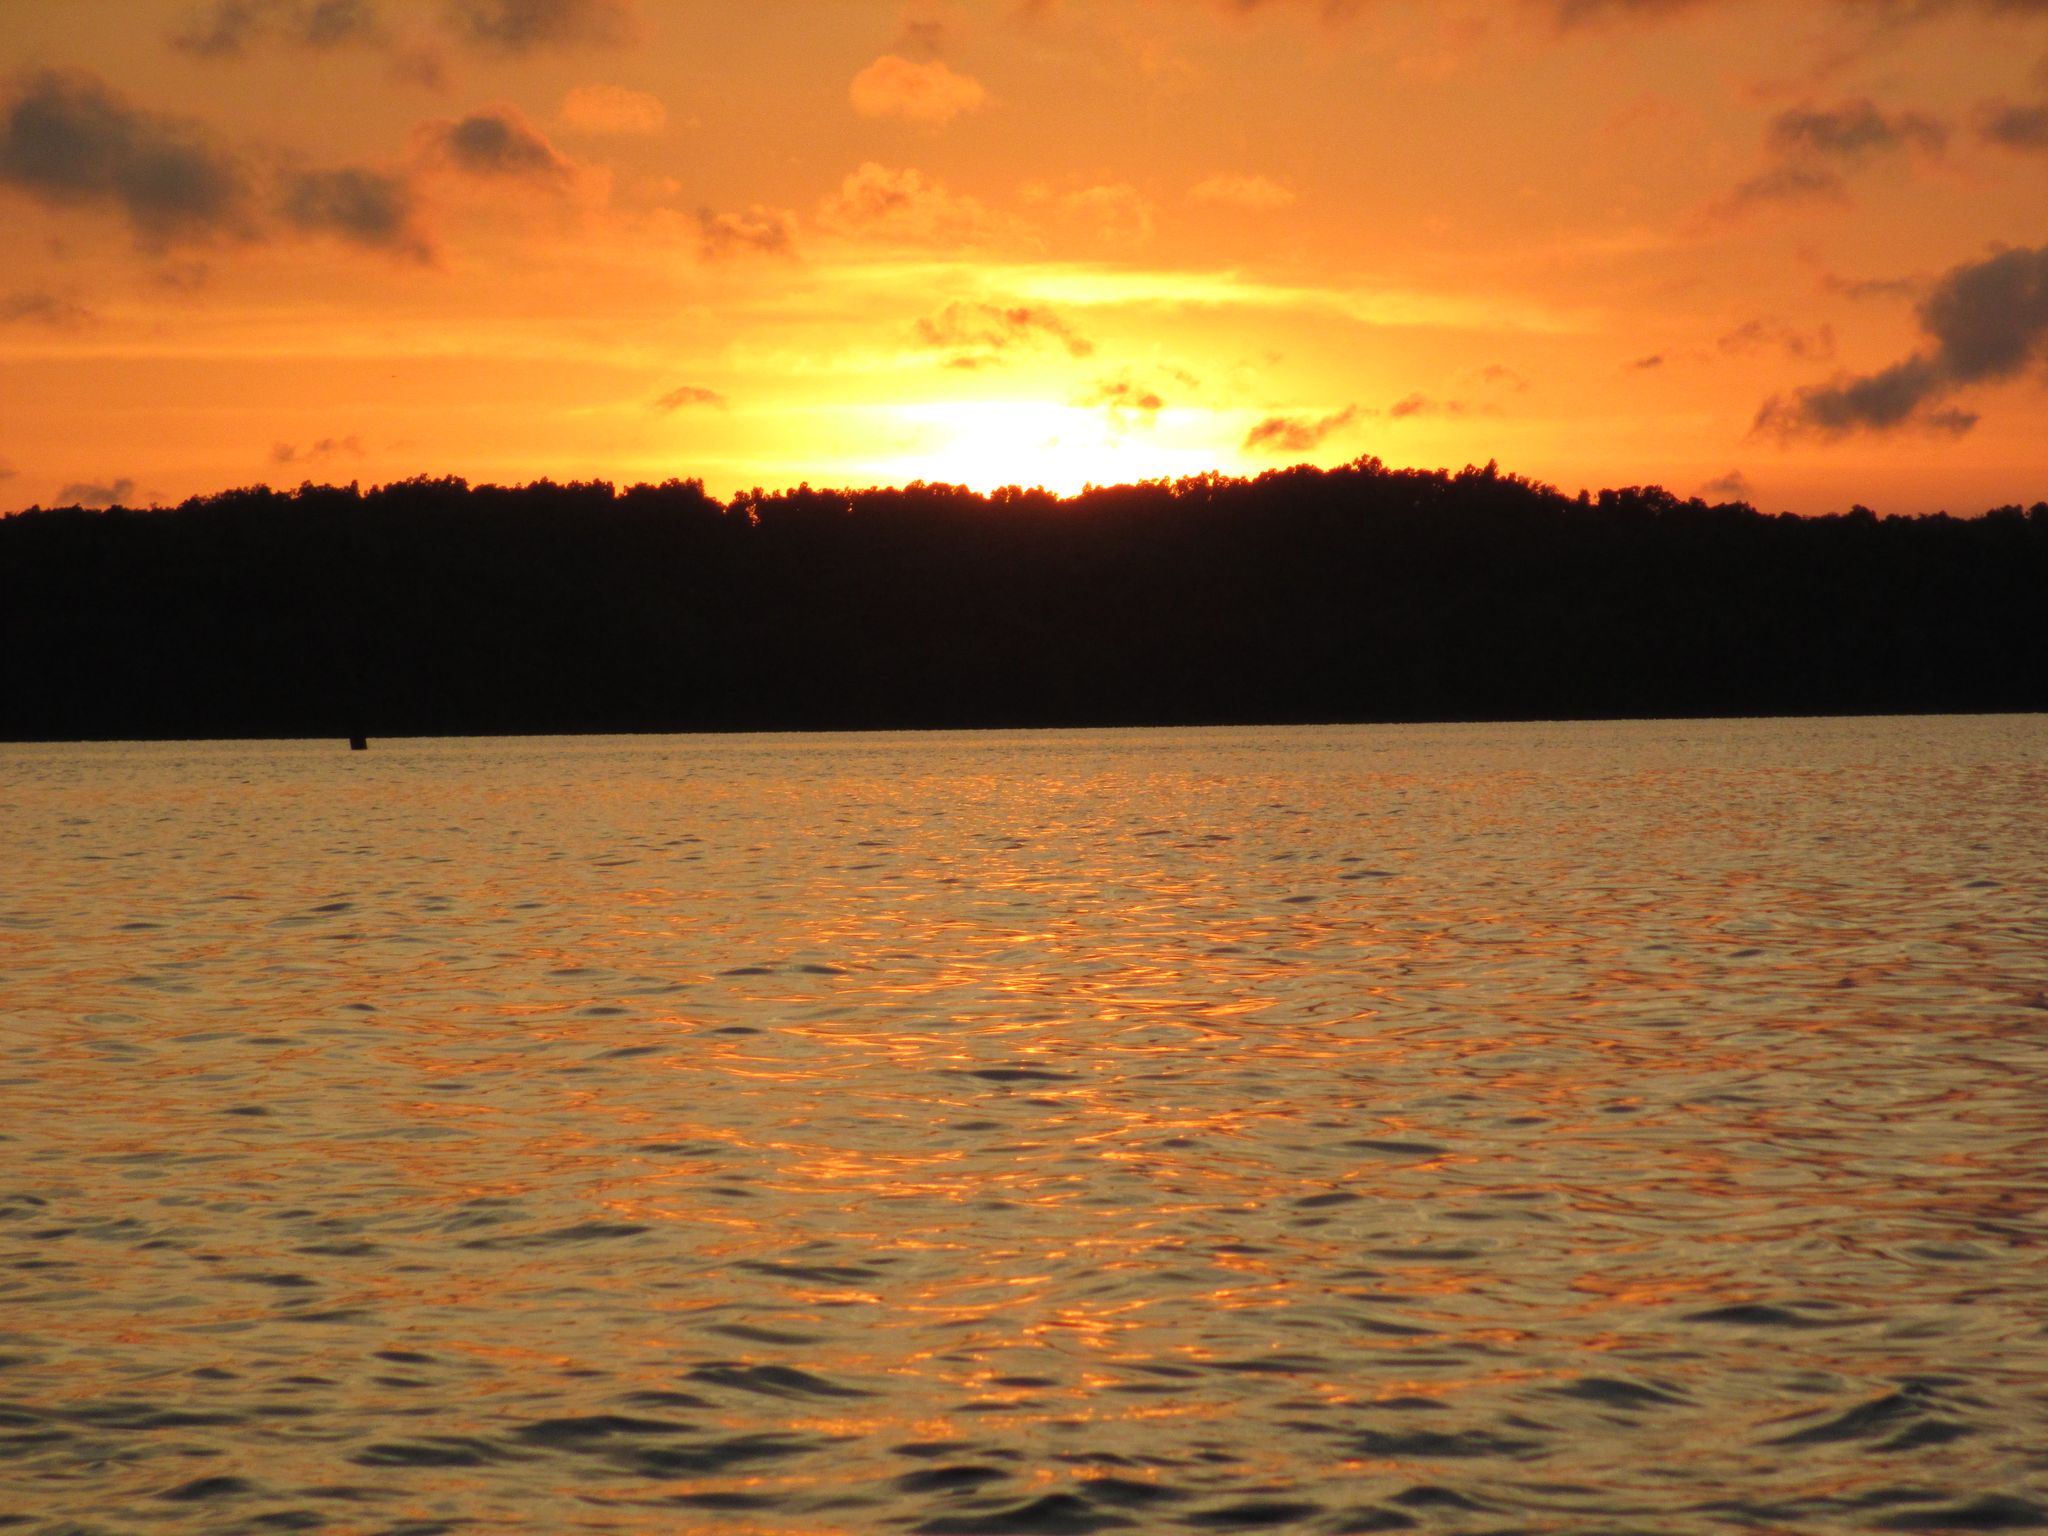 Sunset on Lake Barkley in Land Between the Lakes National Recreation Area